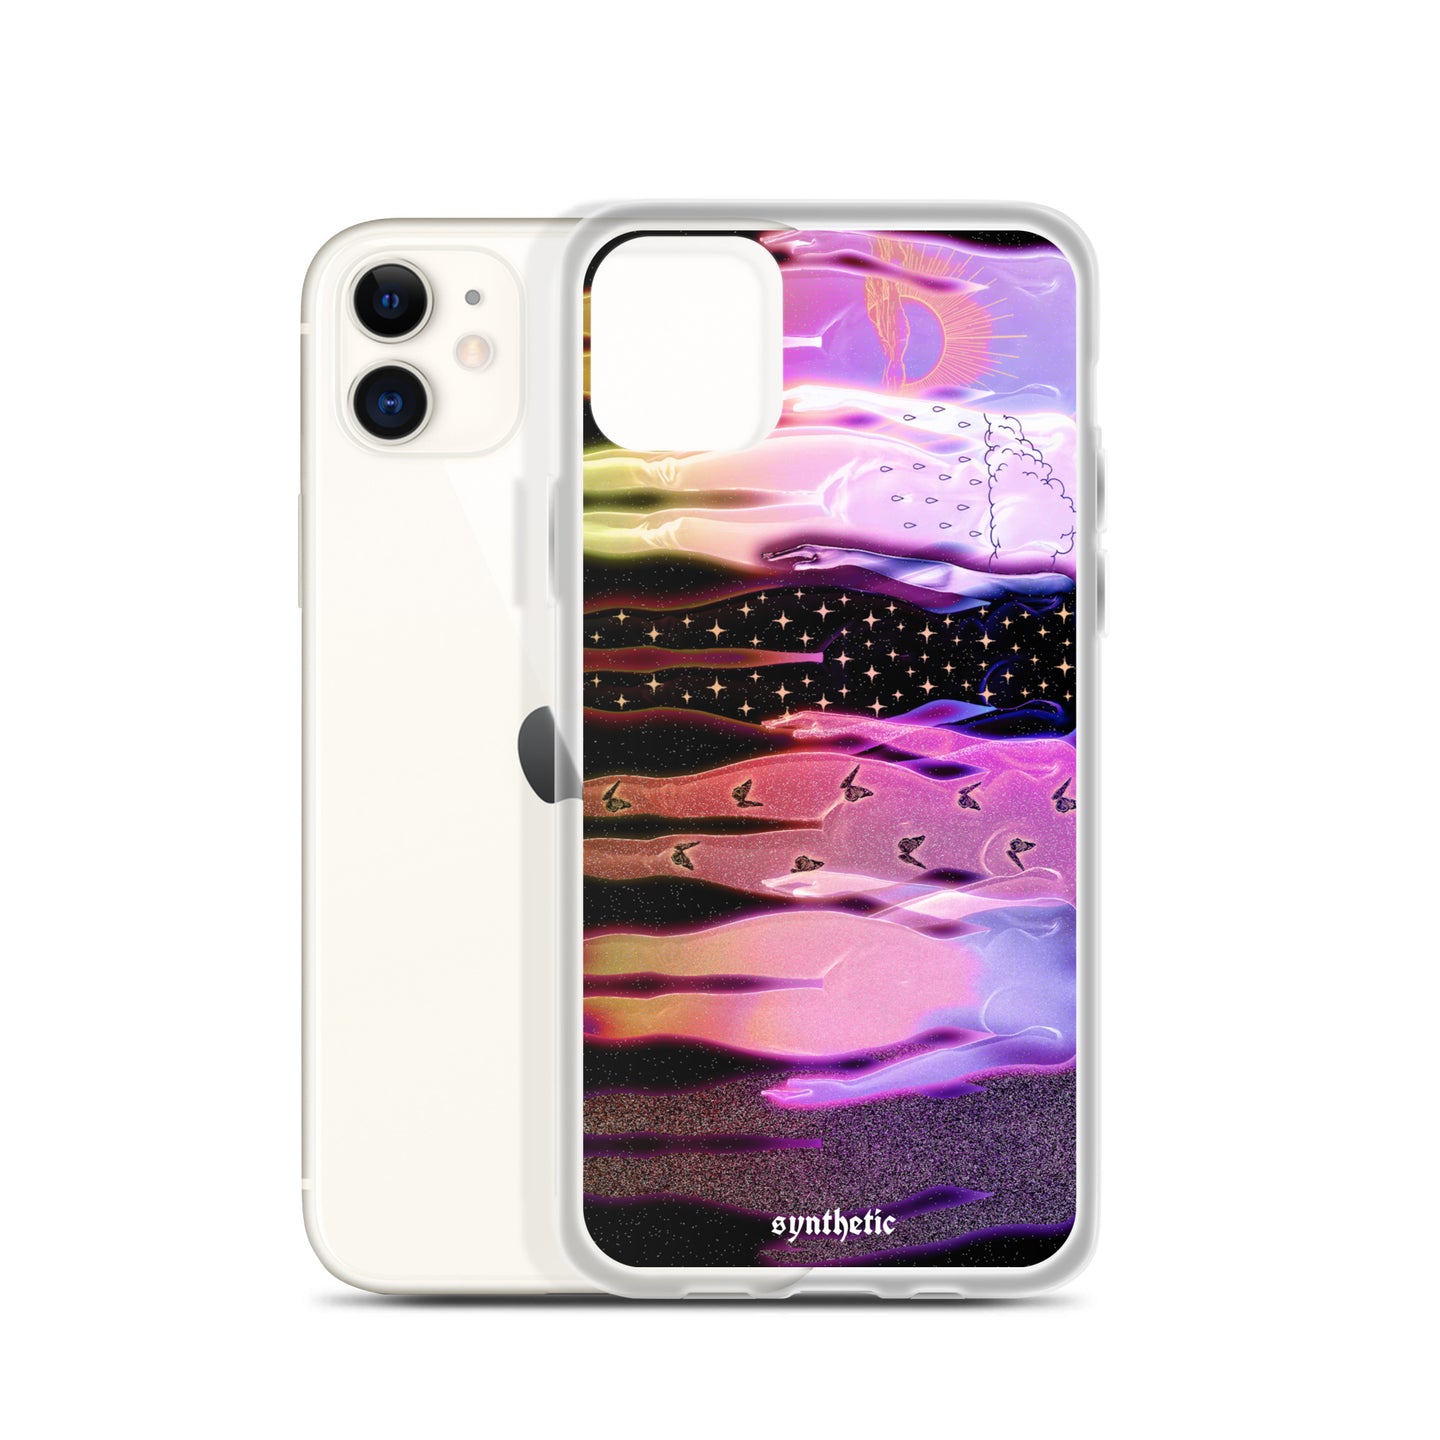 'the shades of being' iphone case